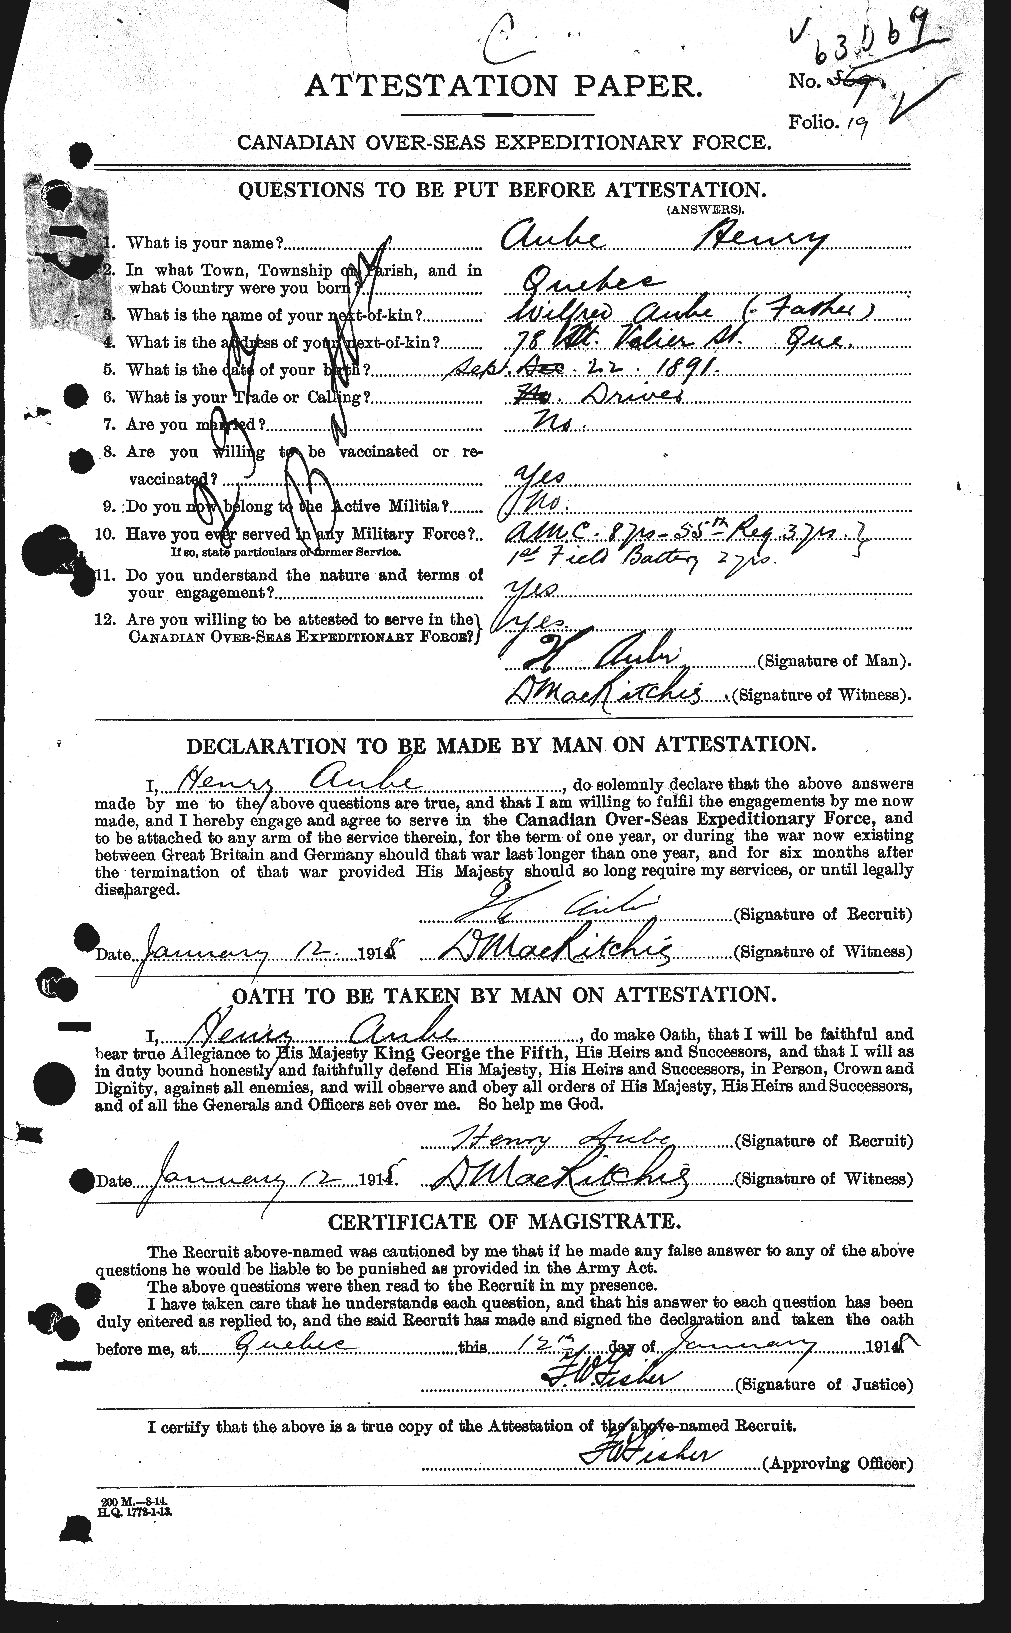 Personnel Records of the First World War - CEF 223928a